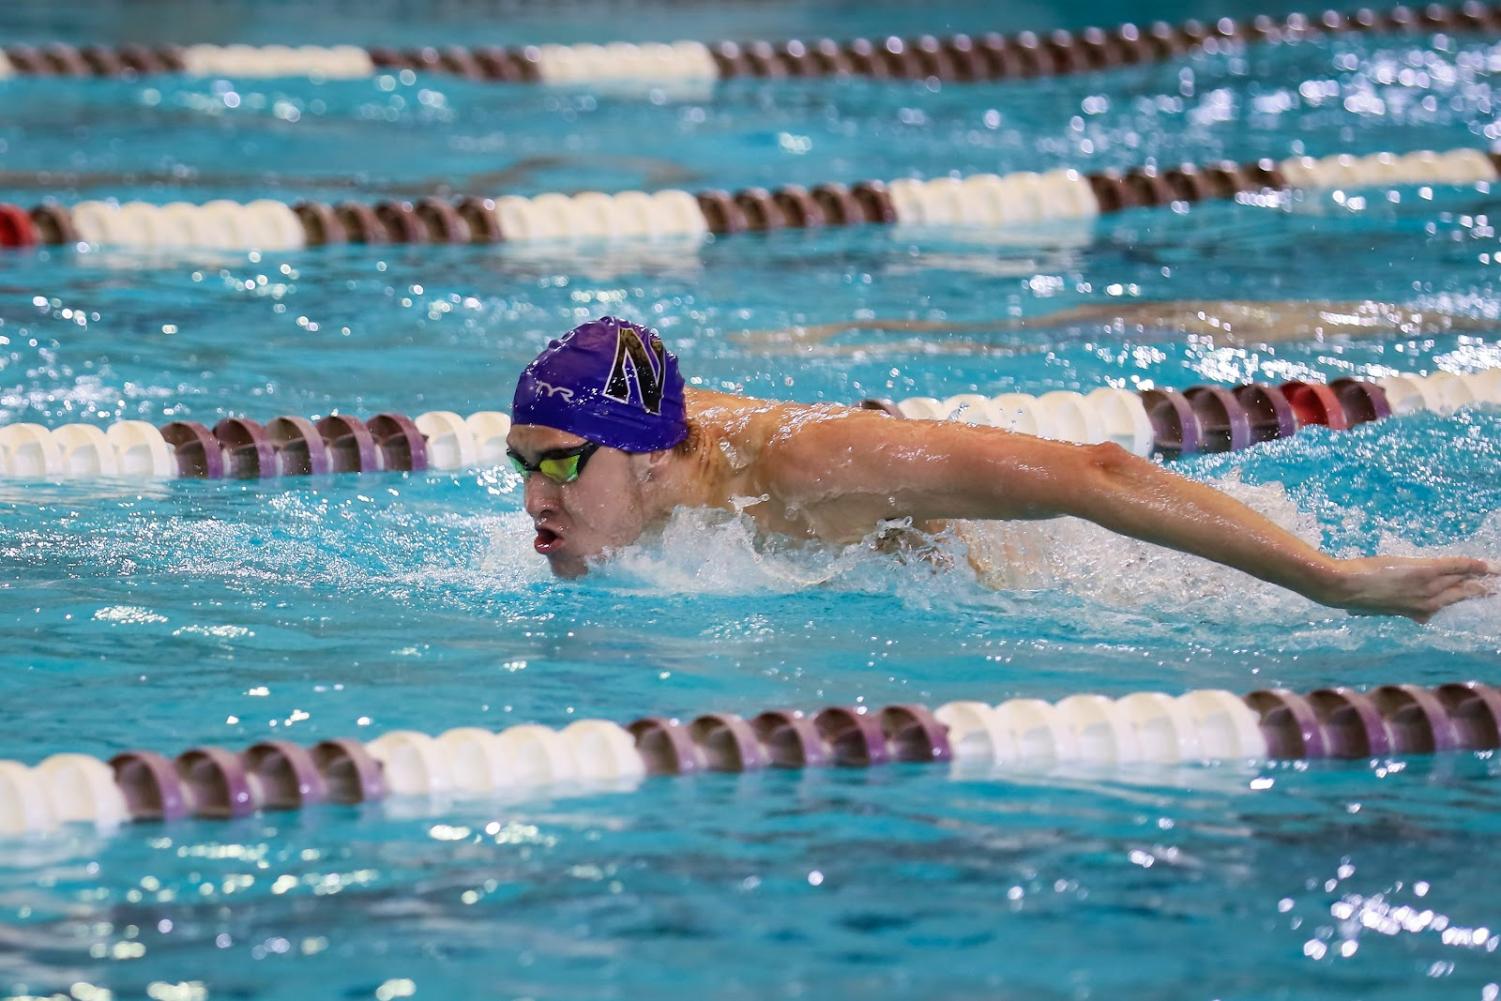 A+swimmer+in+a+purple+cap+with+an+%E2%80%9CN%E2%80%9D+on+it+swims+butterfly+in+a+pool.